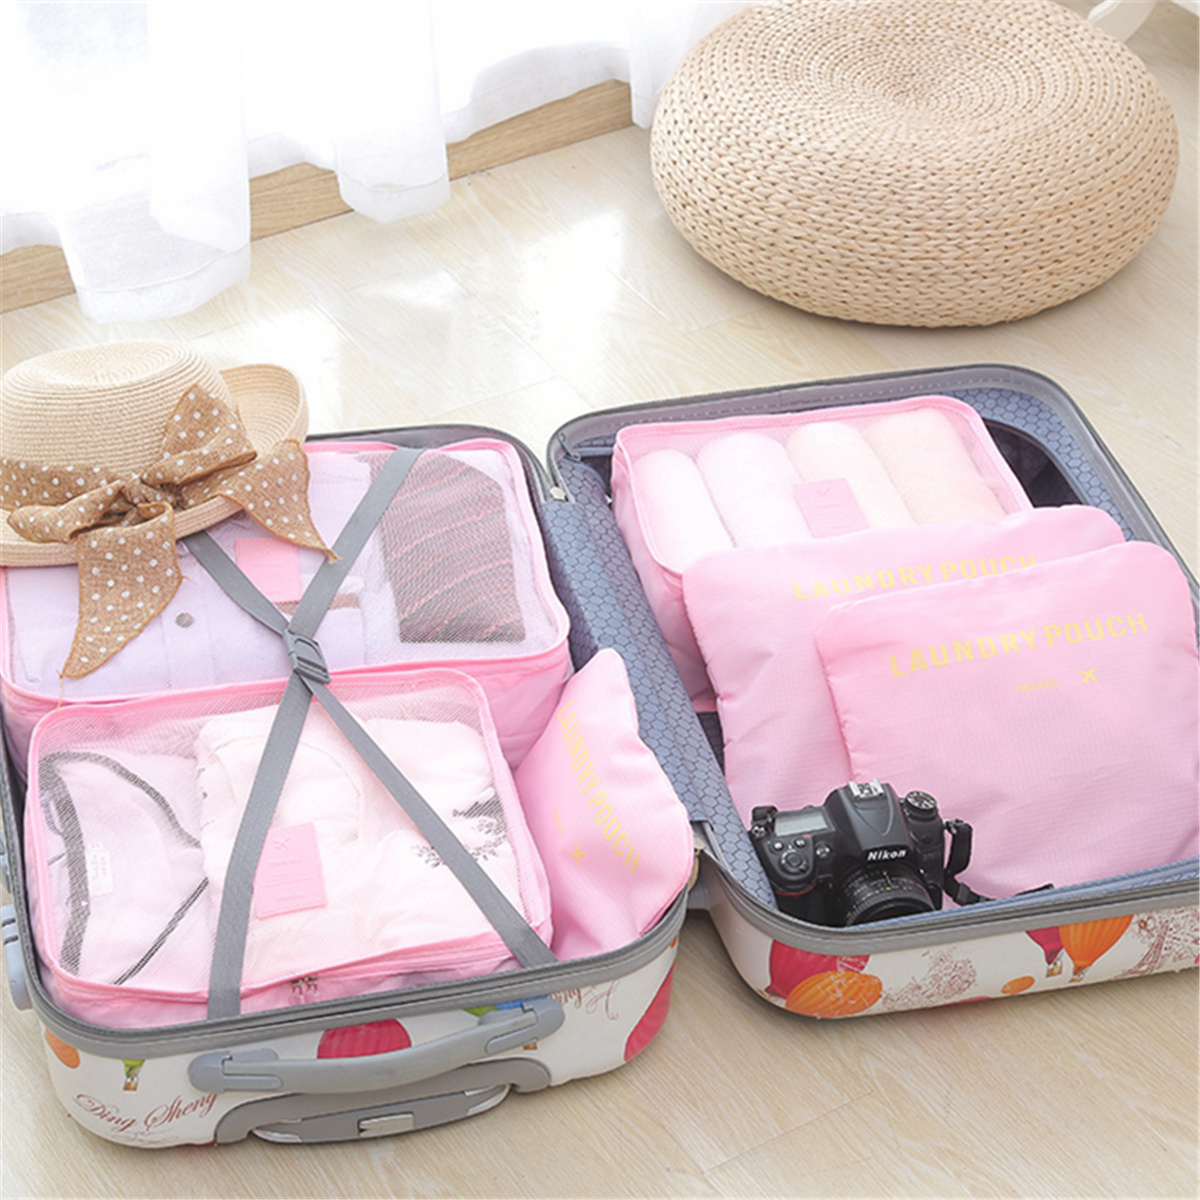 IPReetrade-6Pcs-Travel-Portable-Storage-Bag-Set-Clothes-Packing-Luggage-Organizer-Waterproof-Pouch-1152893-6